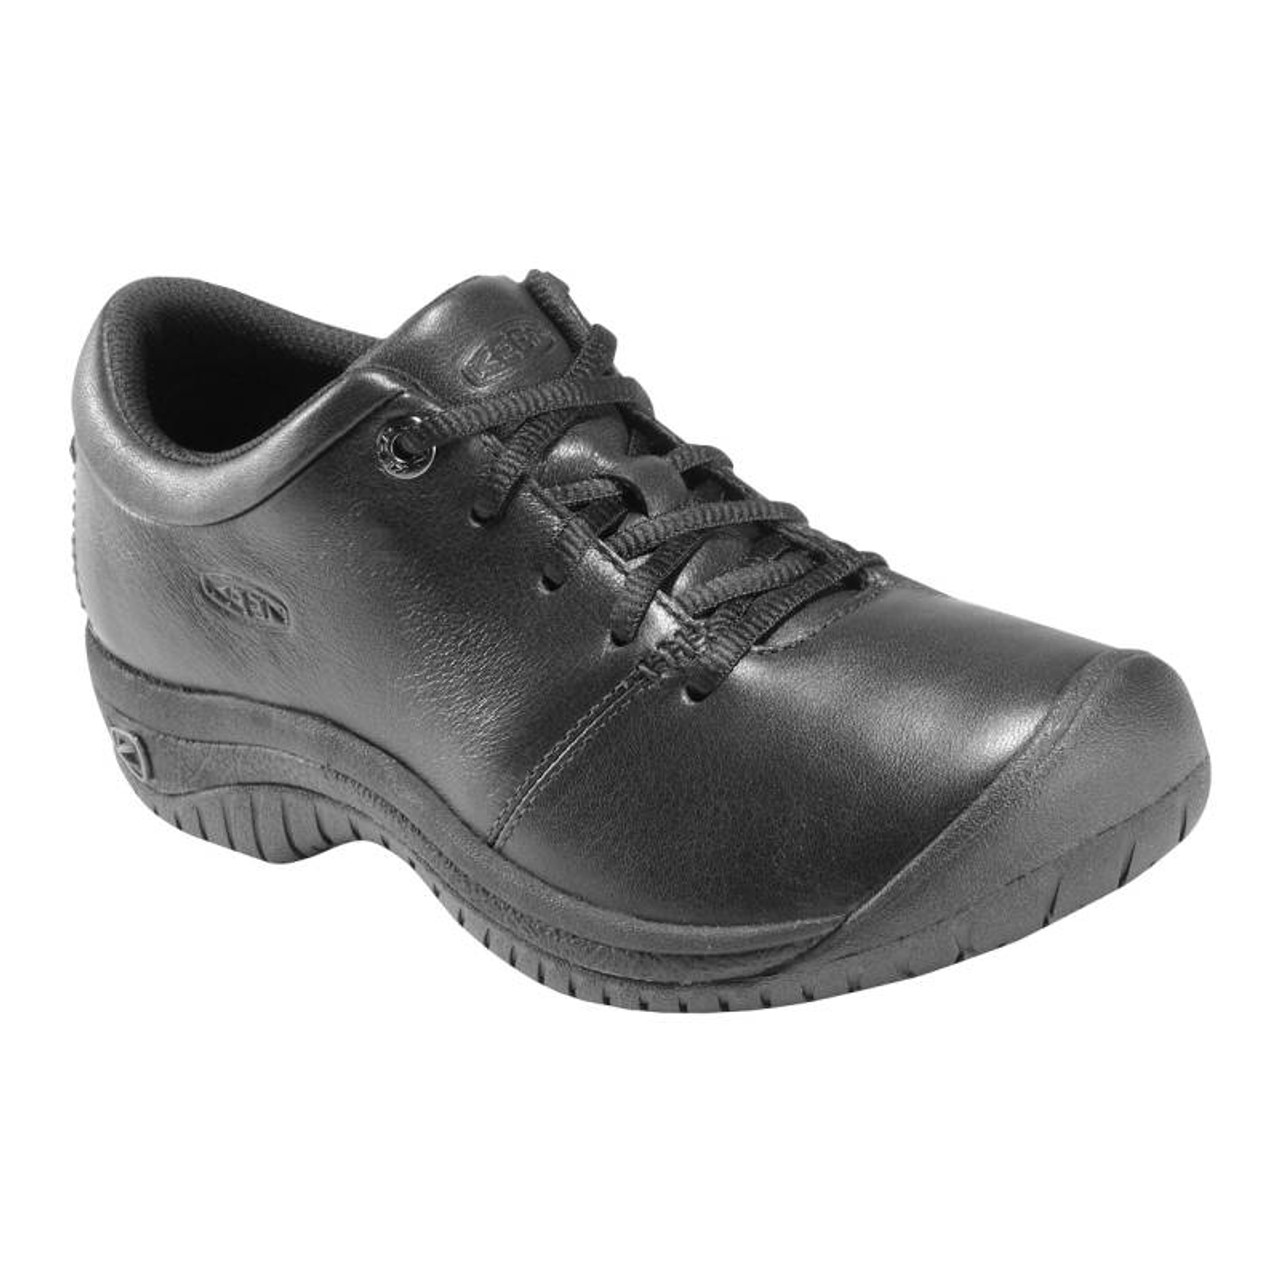 Keen Oxford Womens waterproof slip resistant lace up work shoes ...